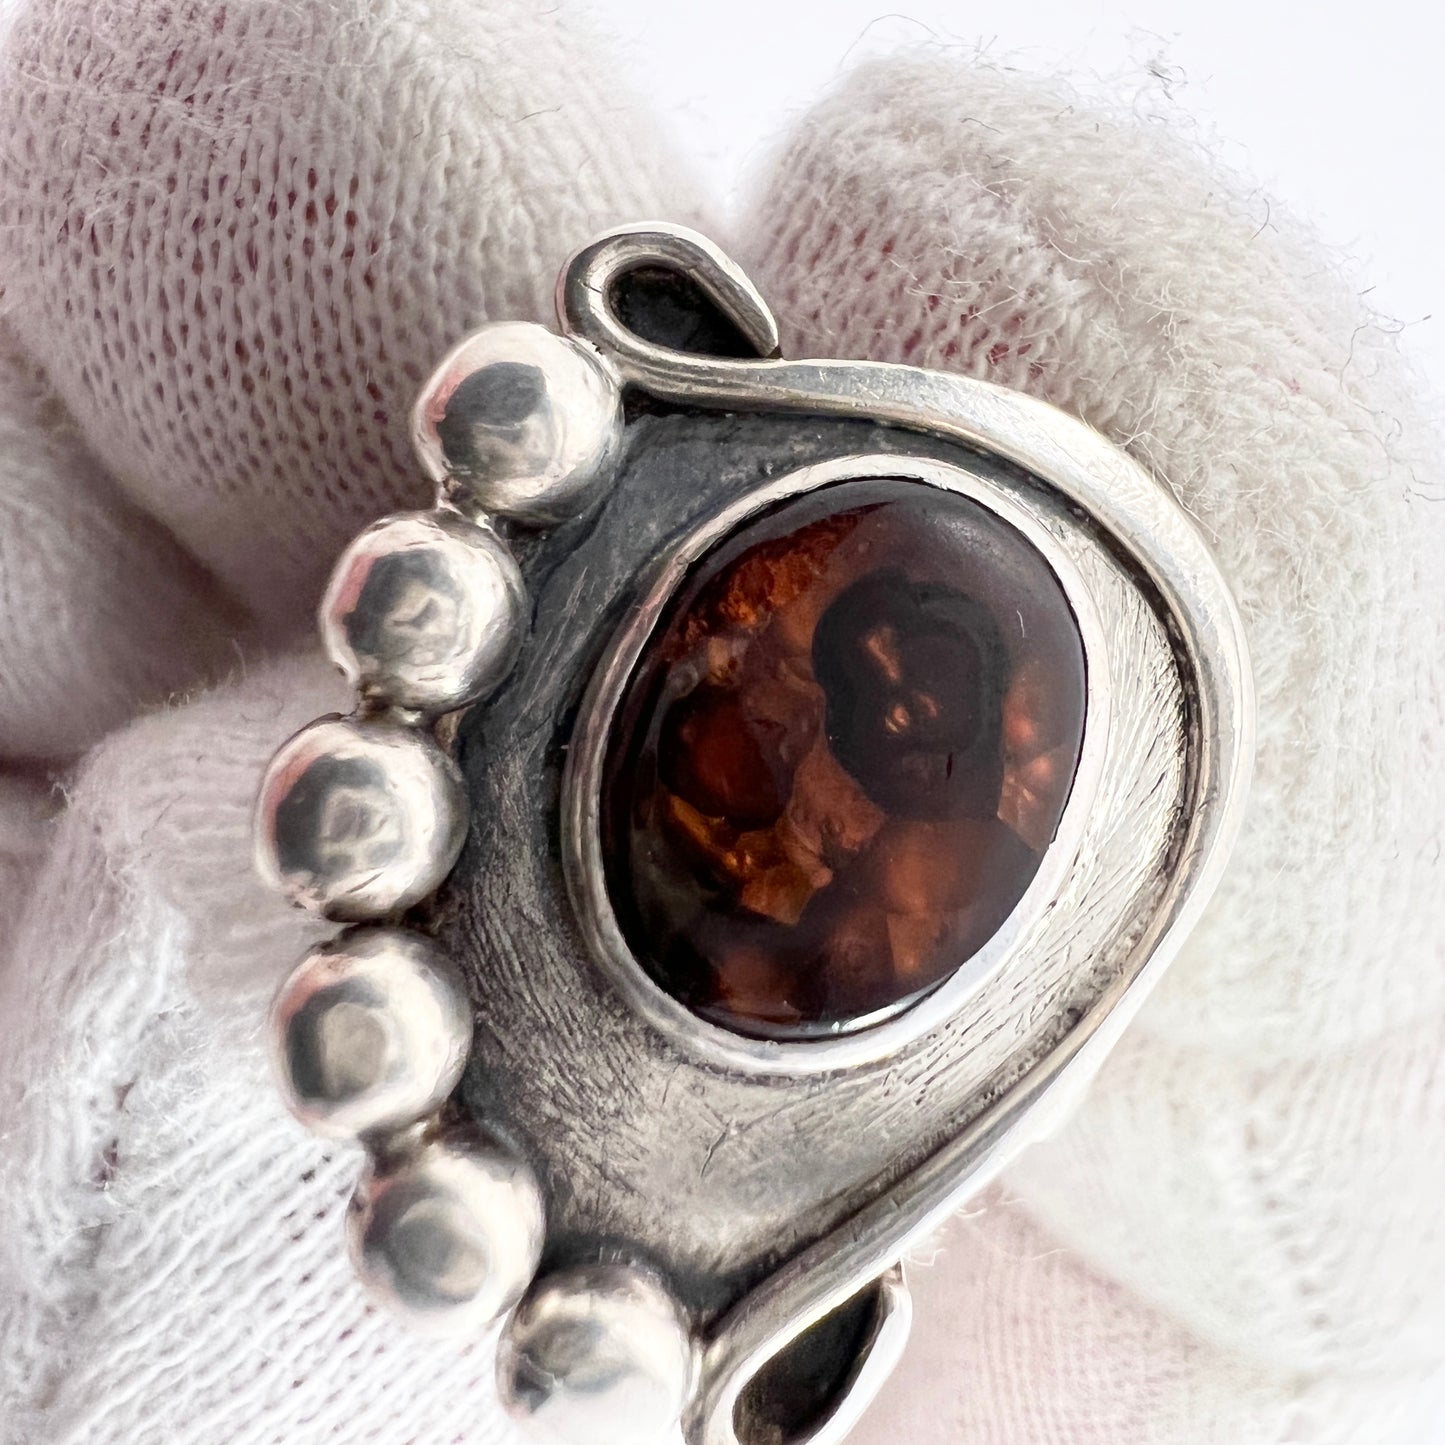 Paul Miller USA, Vintage 1950-60s Sterling Silver Fire Agate Ring. Signed